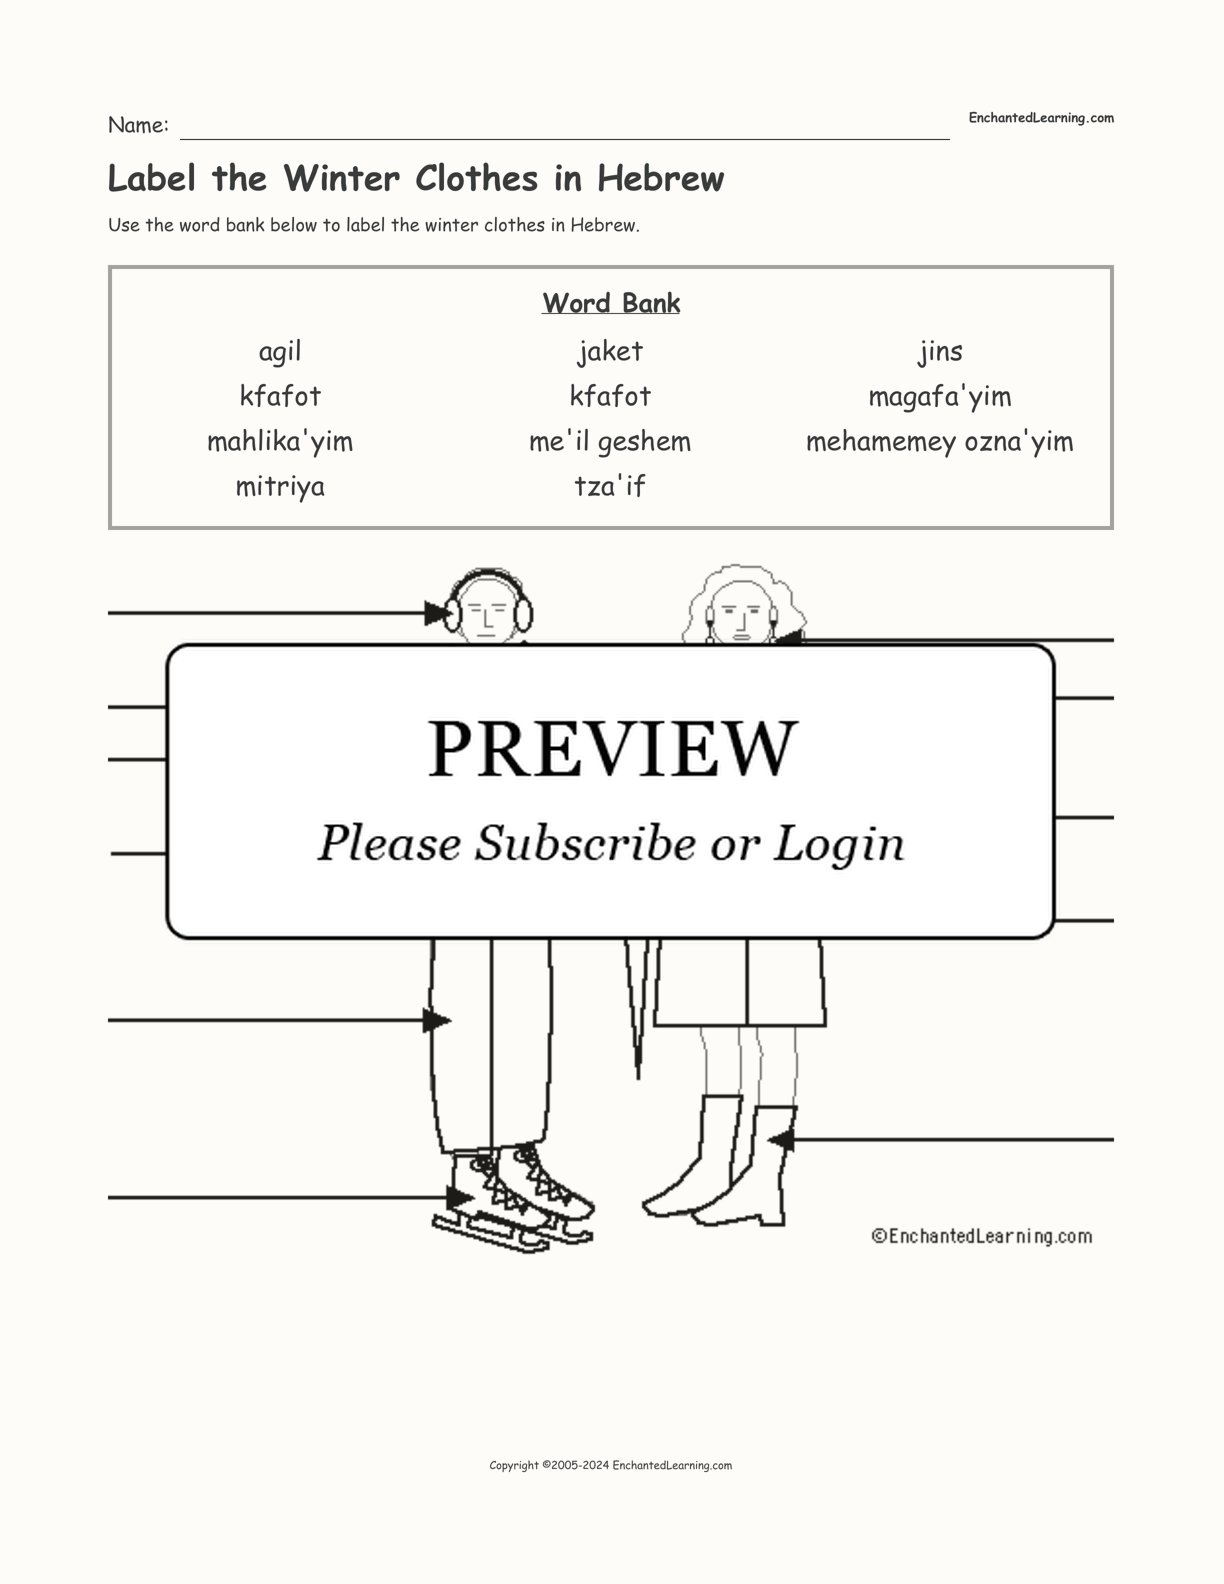 Label the Winter Clothes in Hebrew interactive worksheet page 1